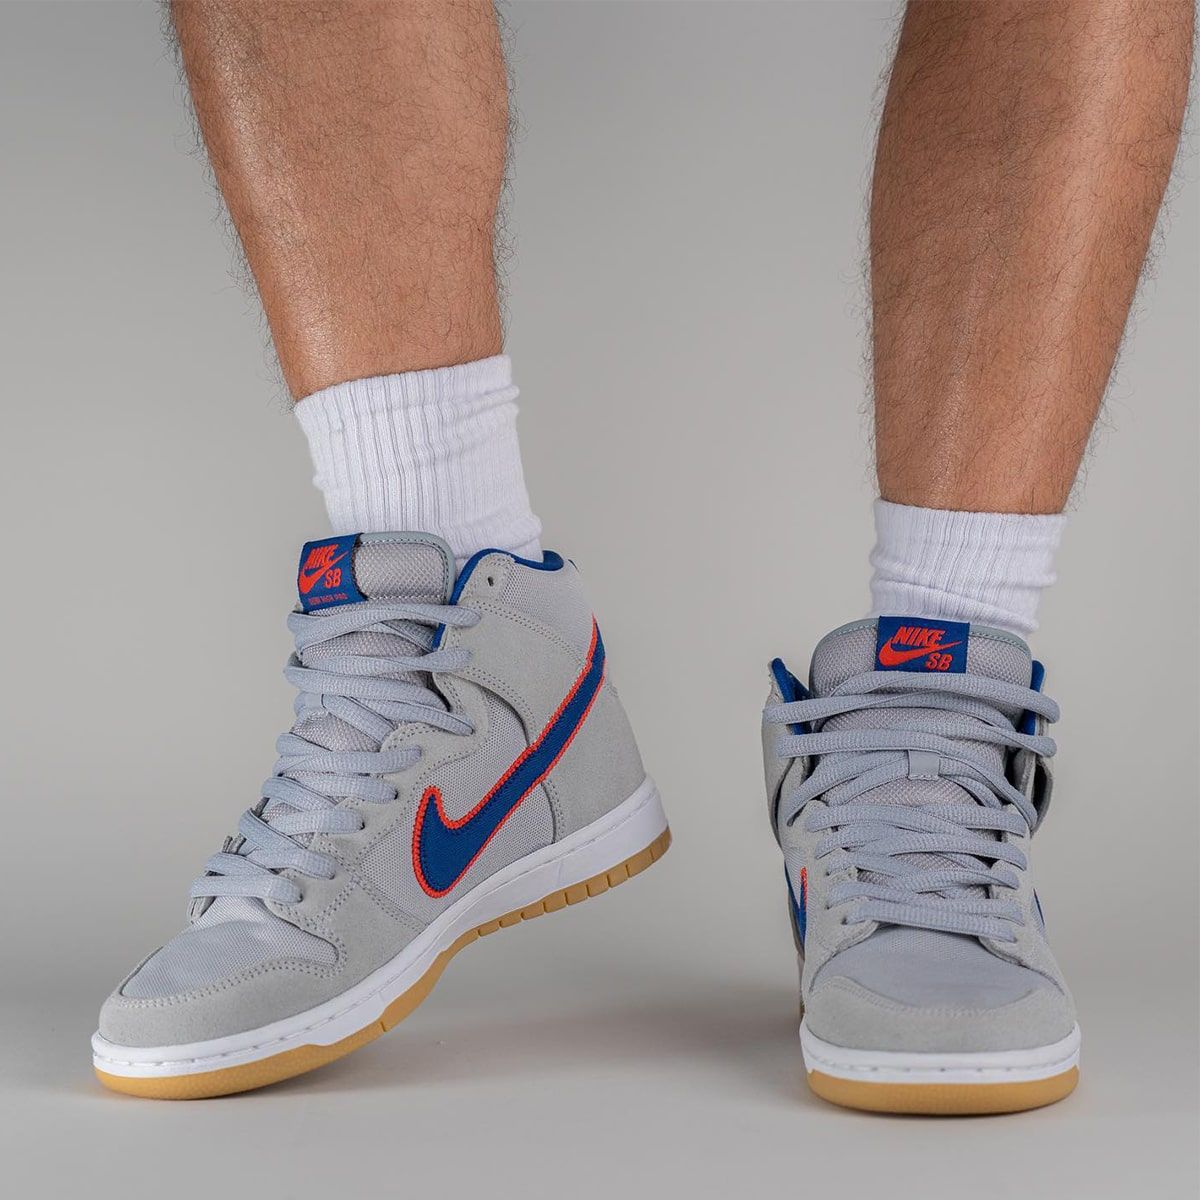 Where to Buy the Nike SB Dunk High “New York Mets” | House of Heat°